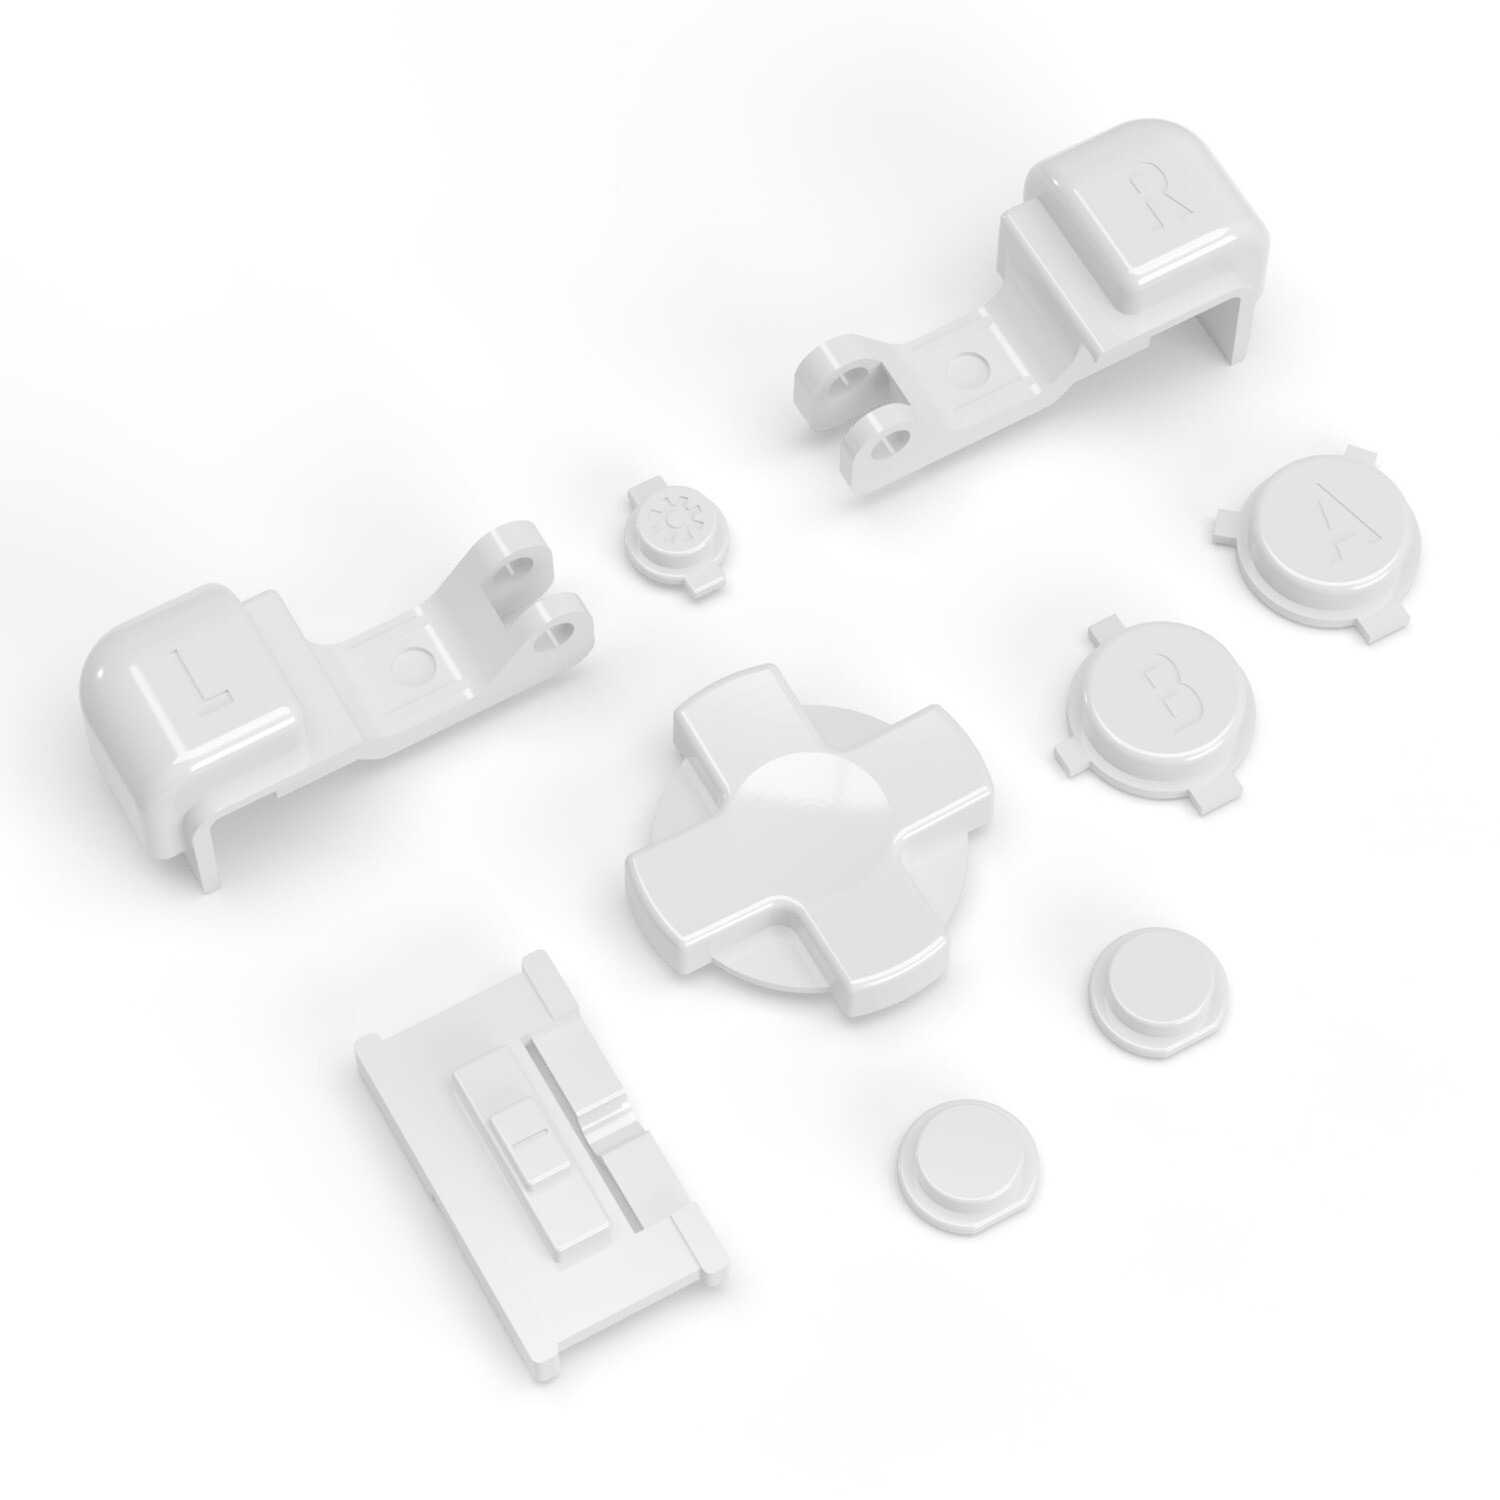 Game Boy Advance SP Buttons (Pure White)